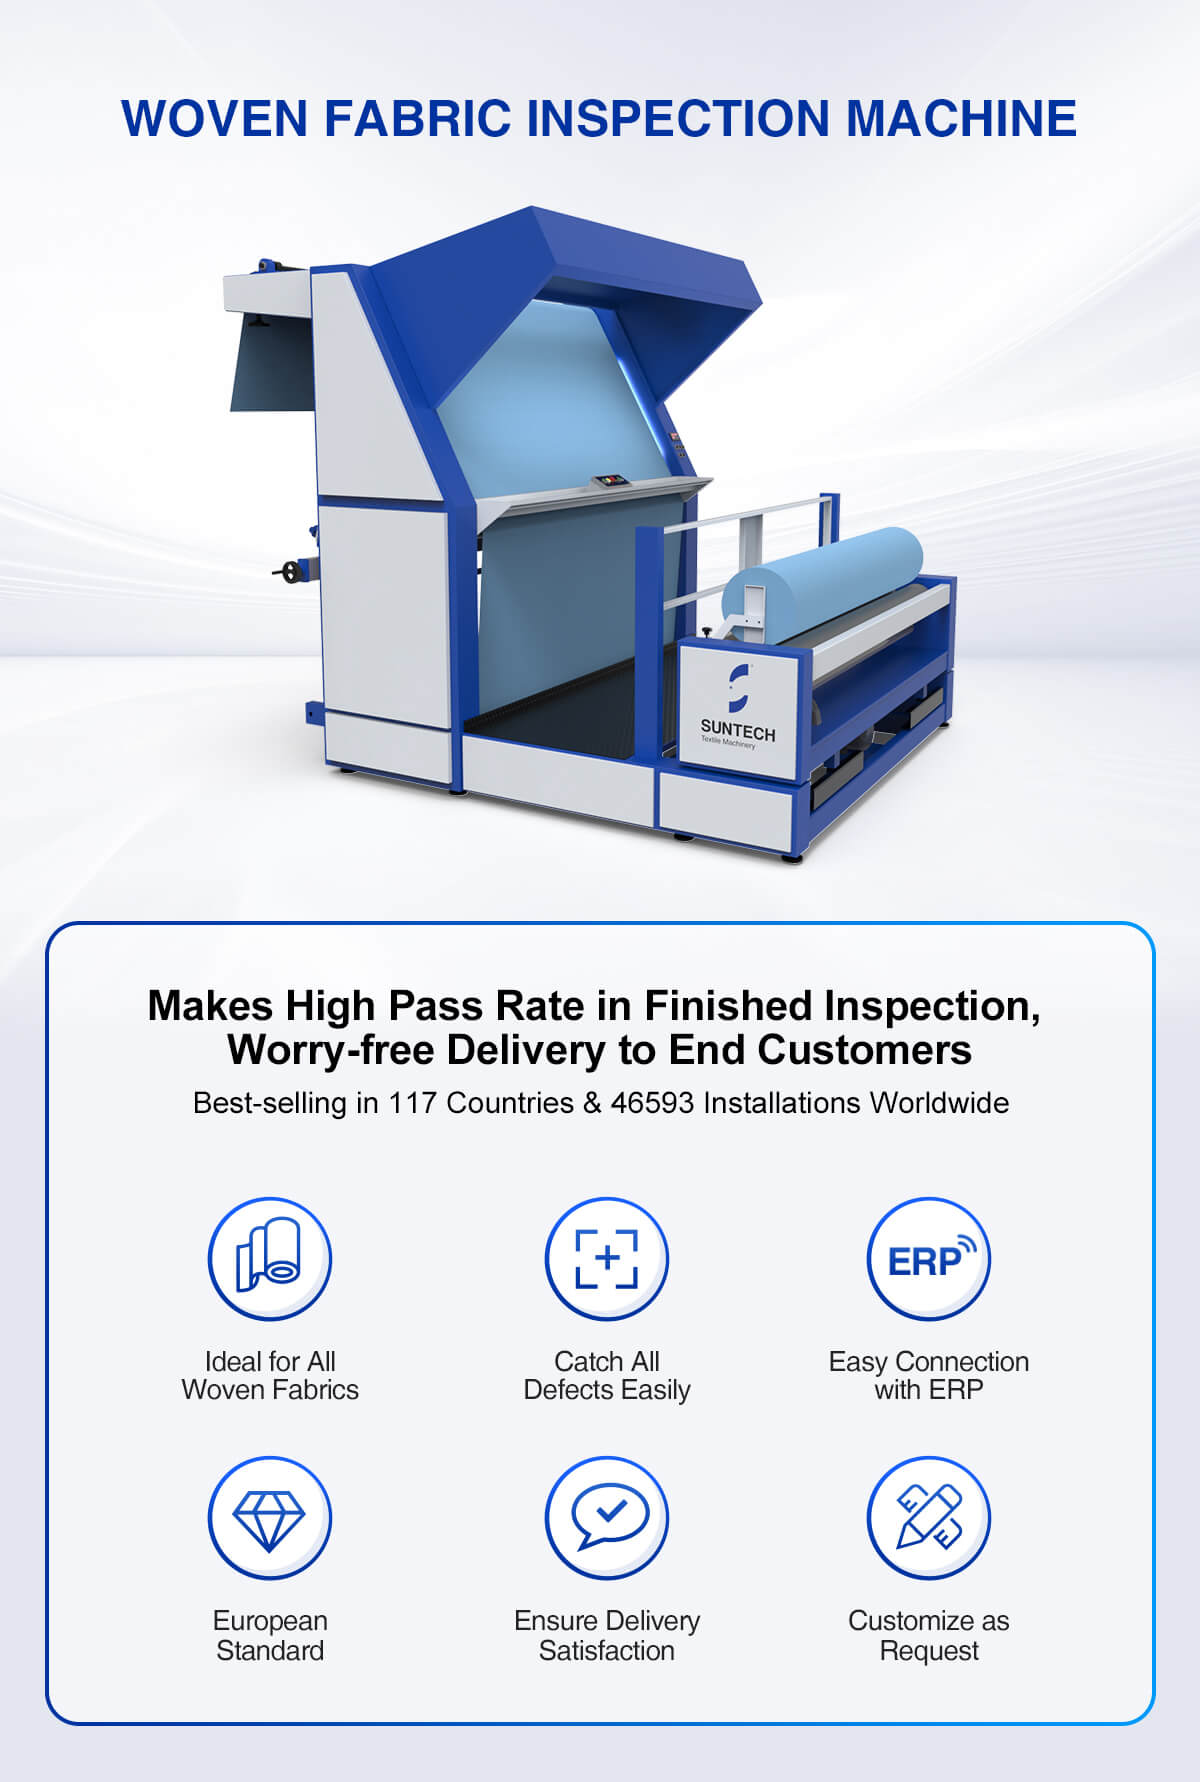 Woven Fabric Inspection Machine features